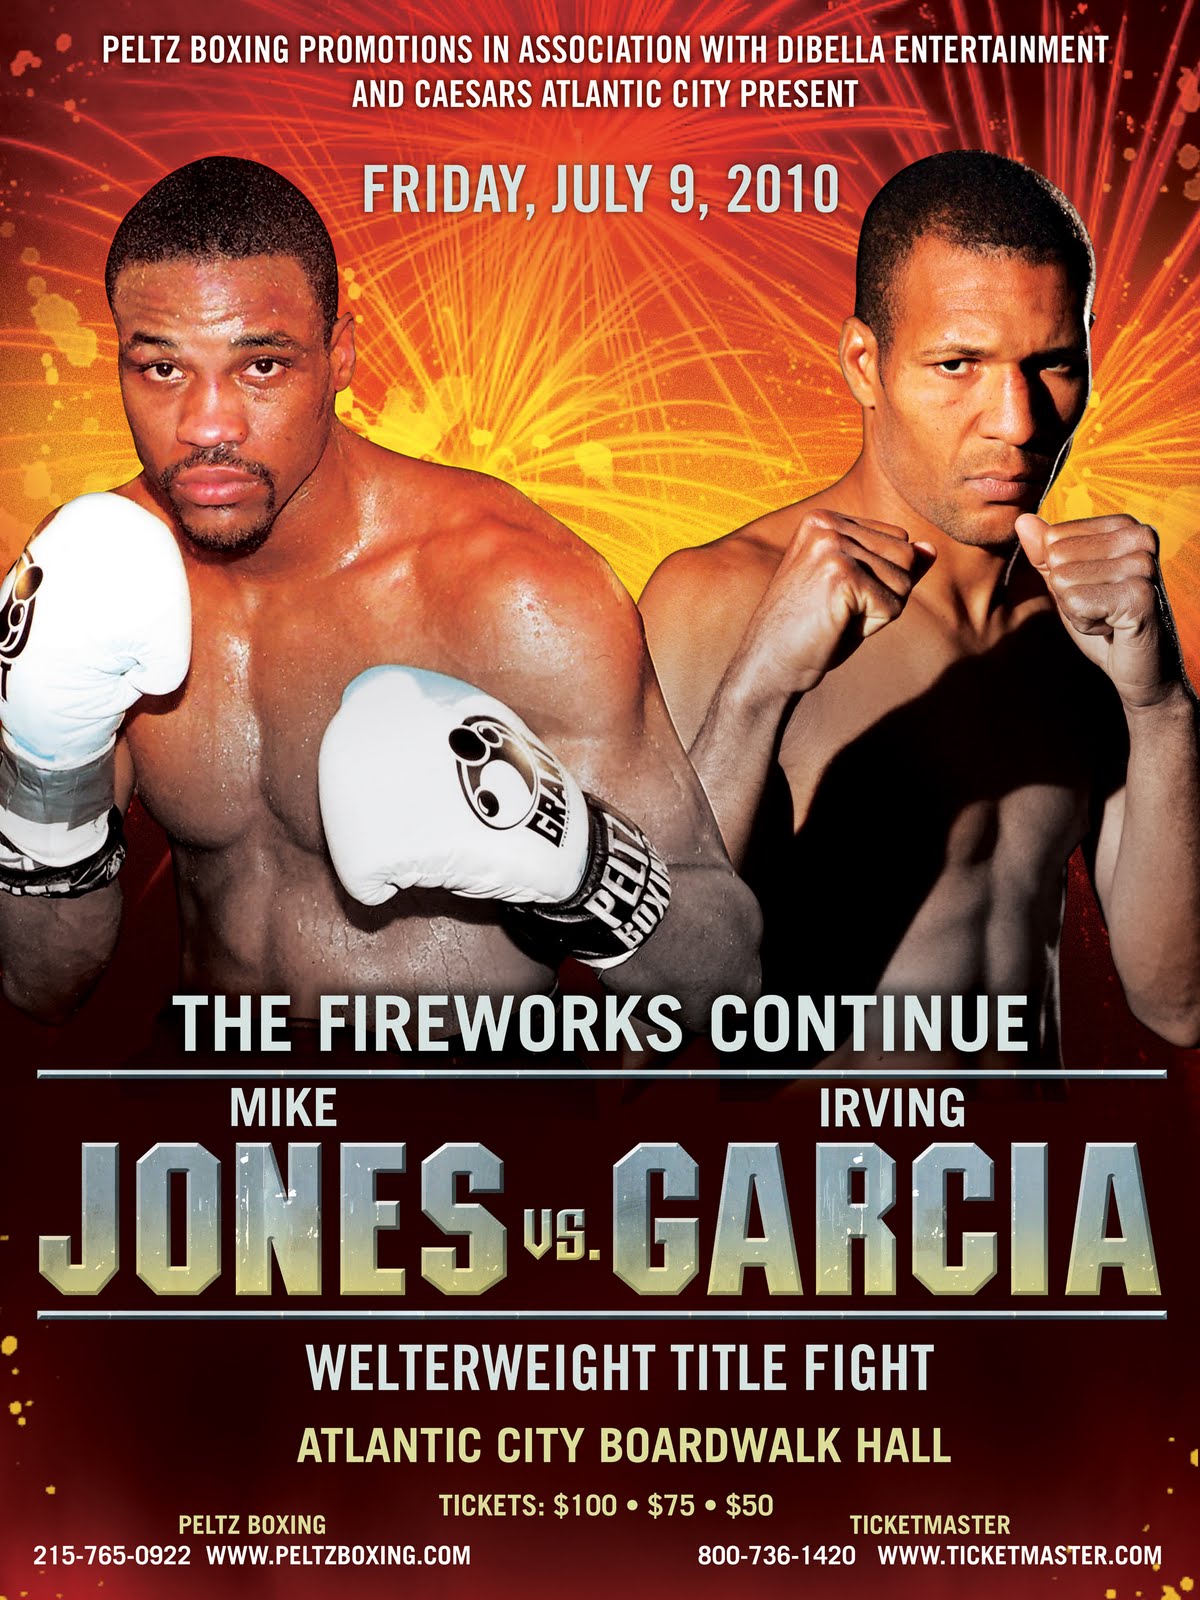 Famous Fight Programs, Tickets and Fight Posters – THE USA BOXING NEWS